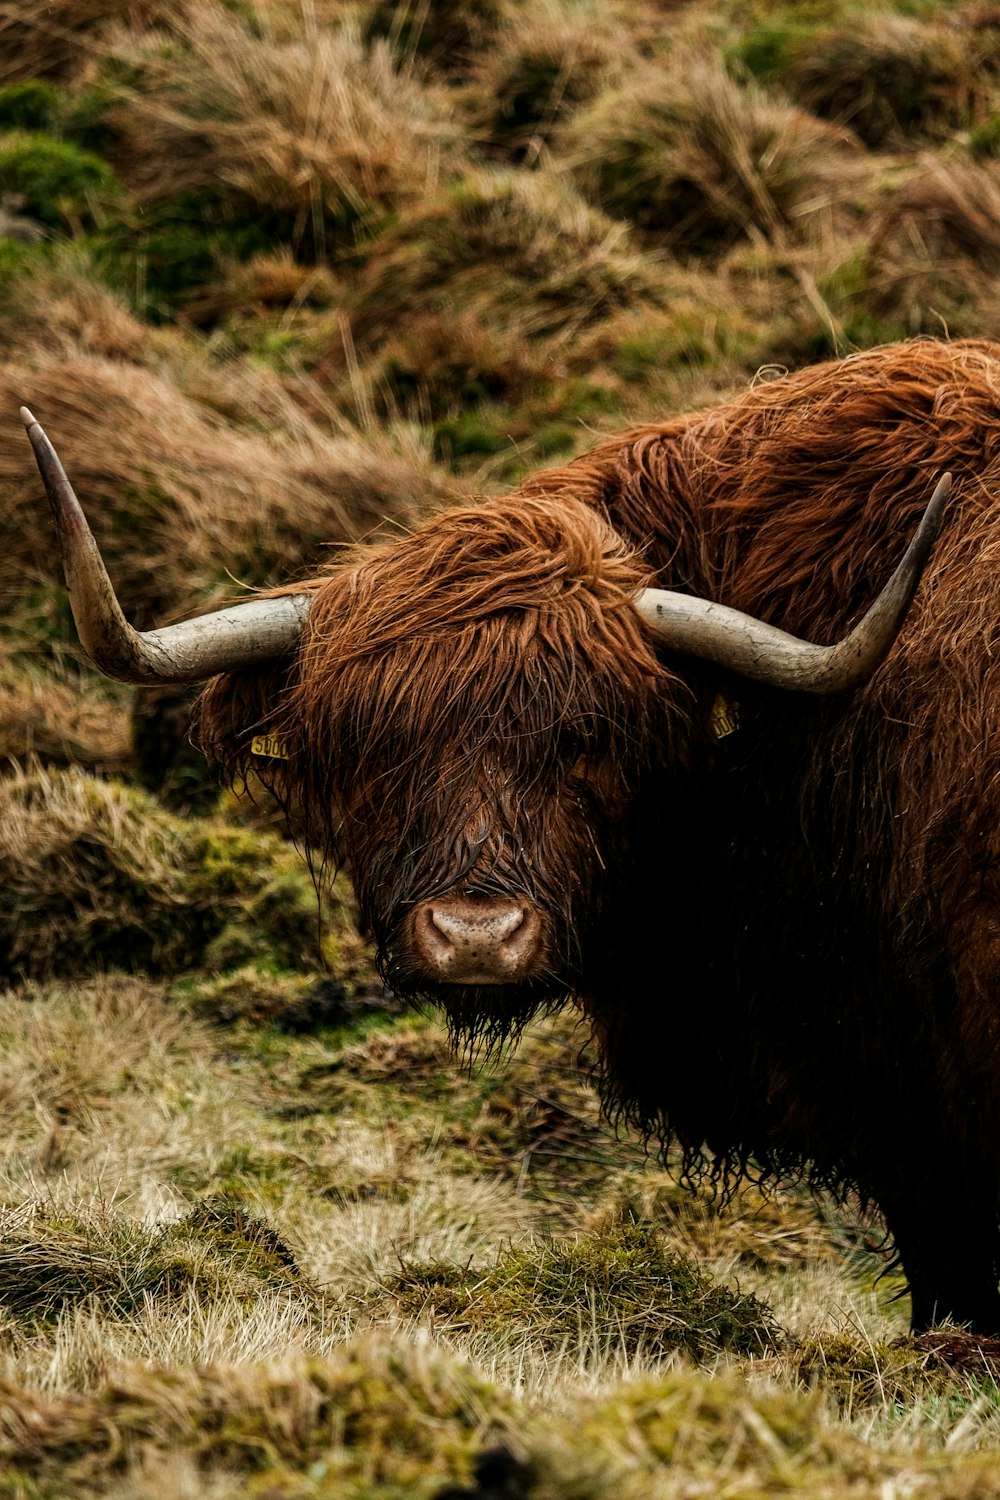 a brown bull with long horns standing in a field